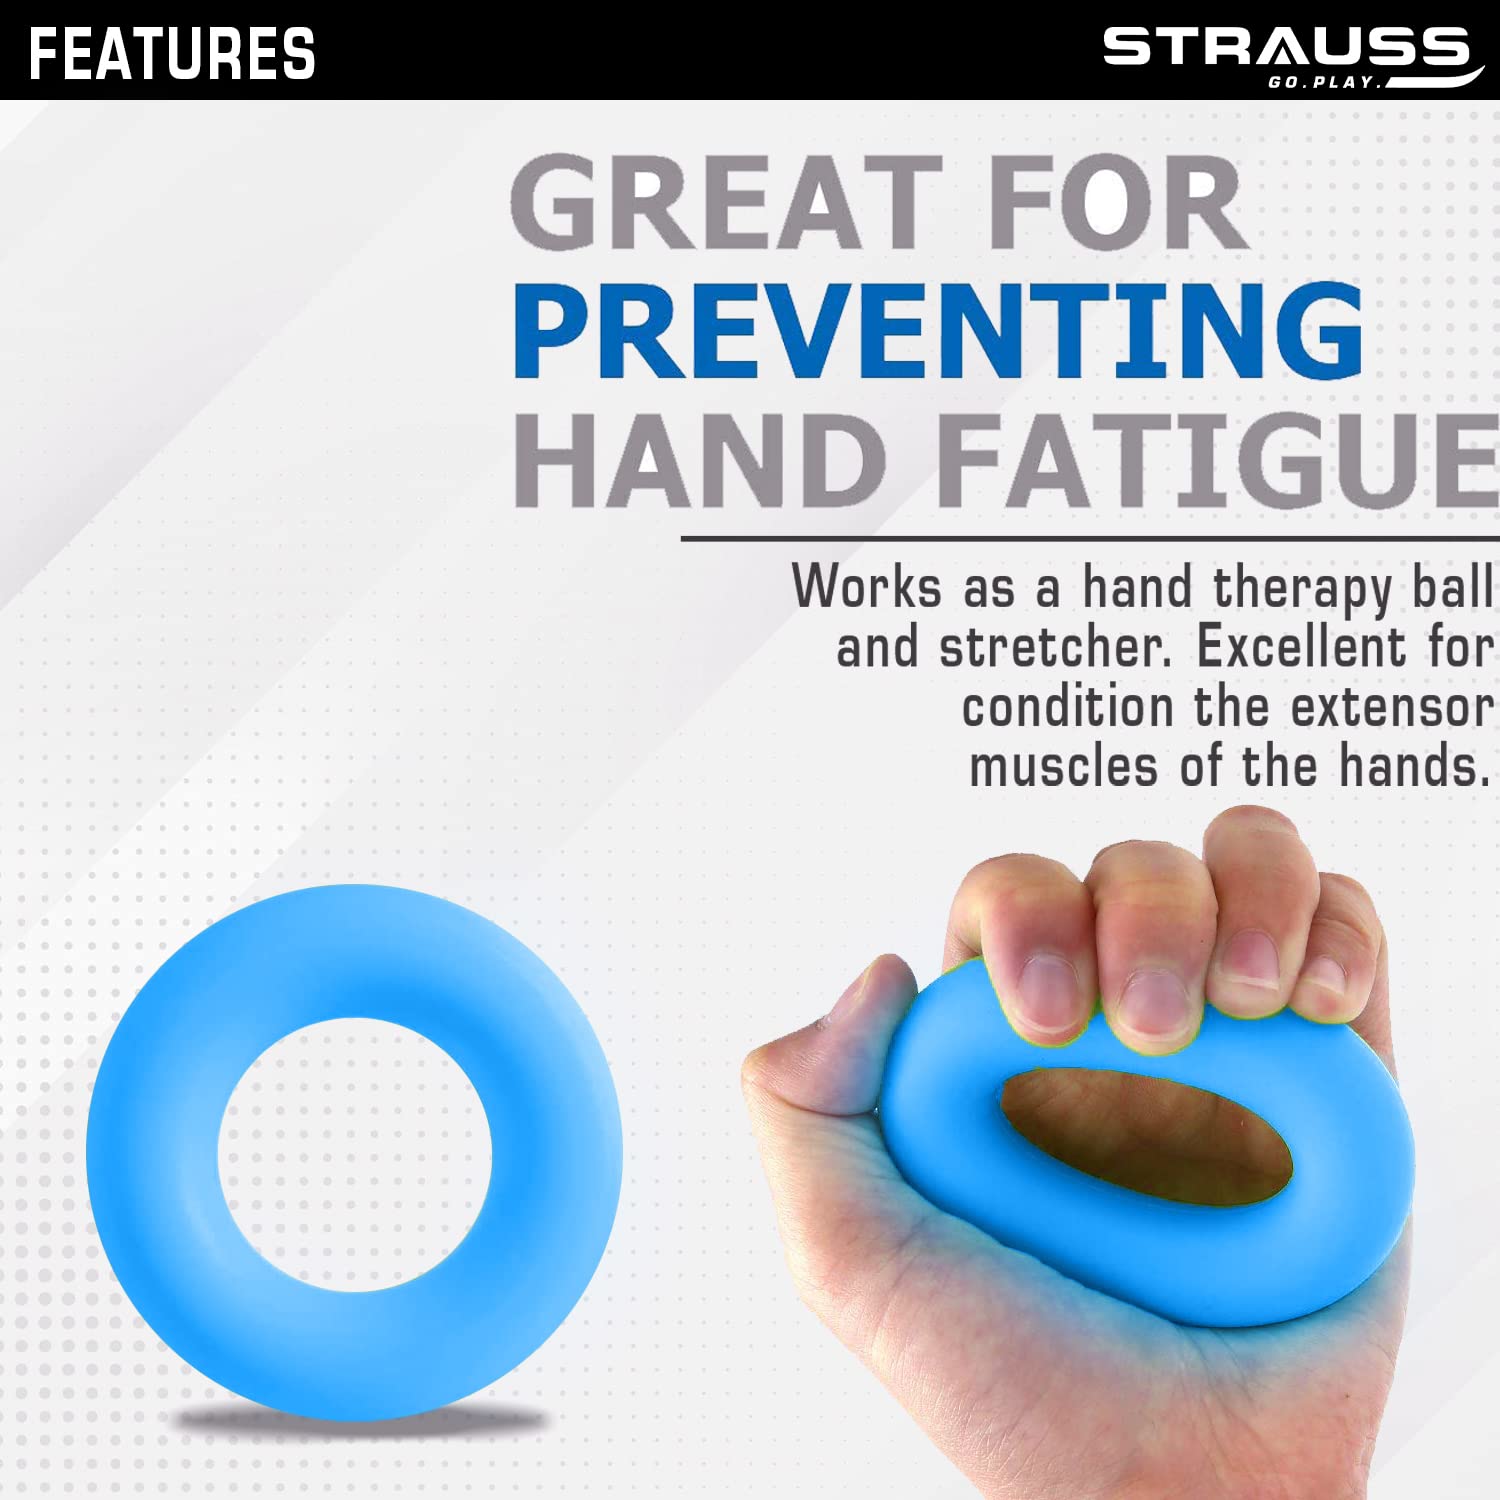 Strauss Silicon Palm Hand Grip Exerciser, (Blue)